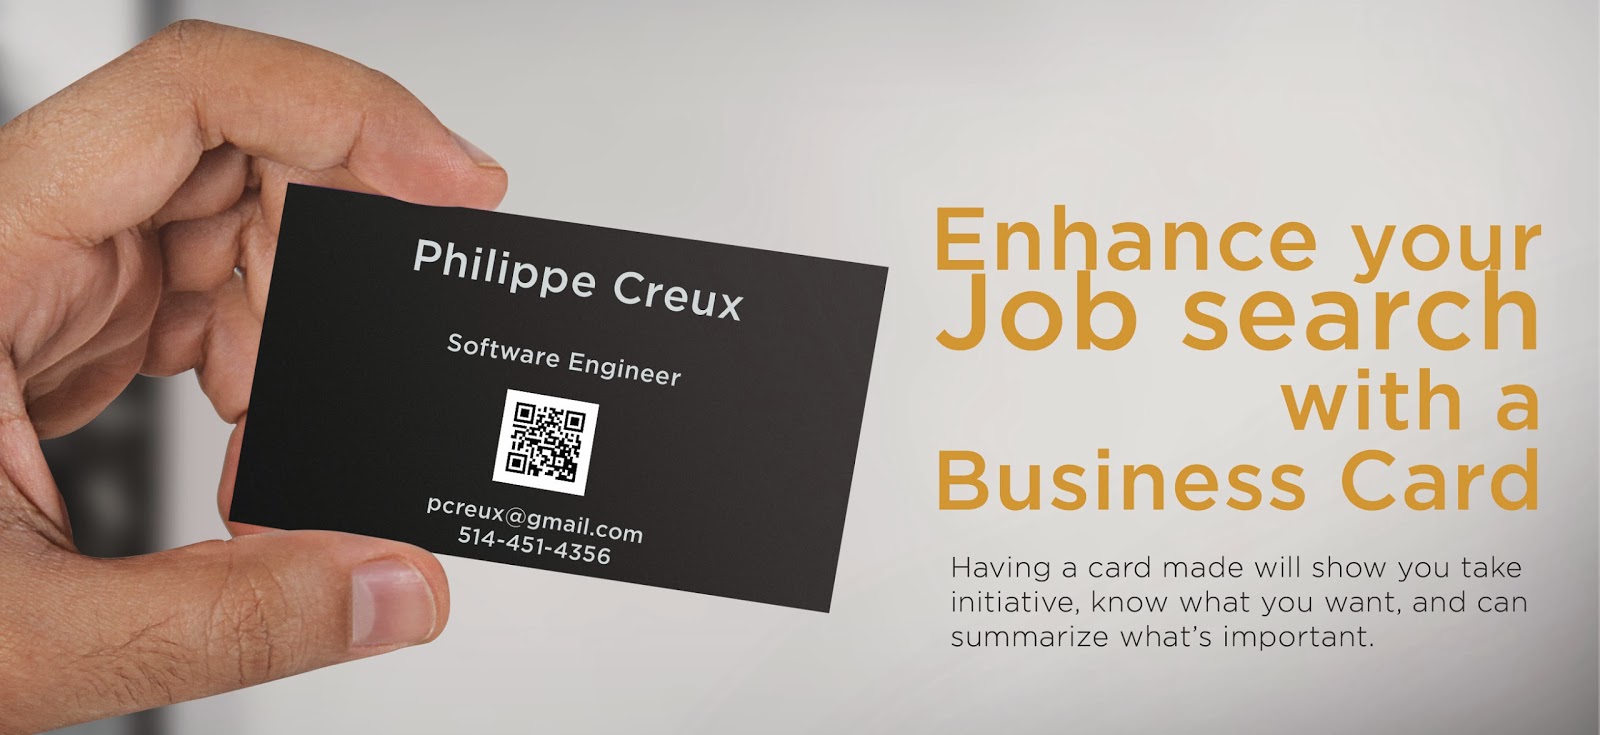 business cards for job seekers 2